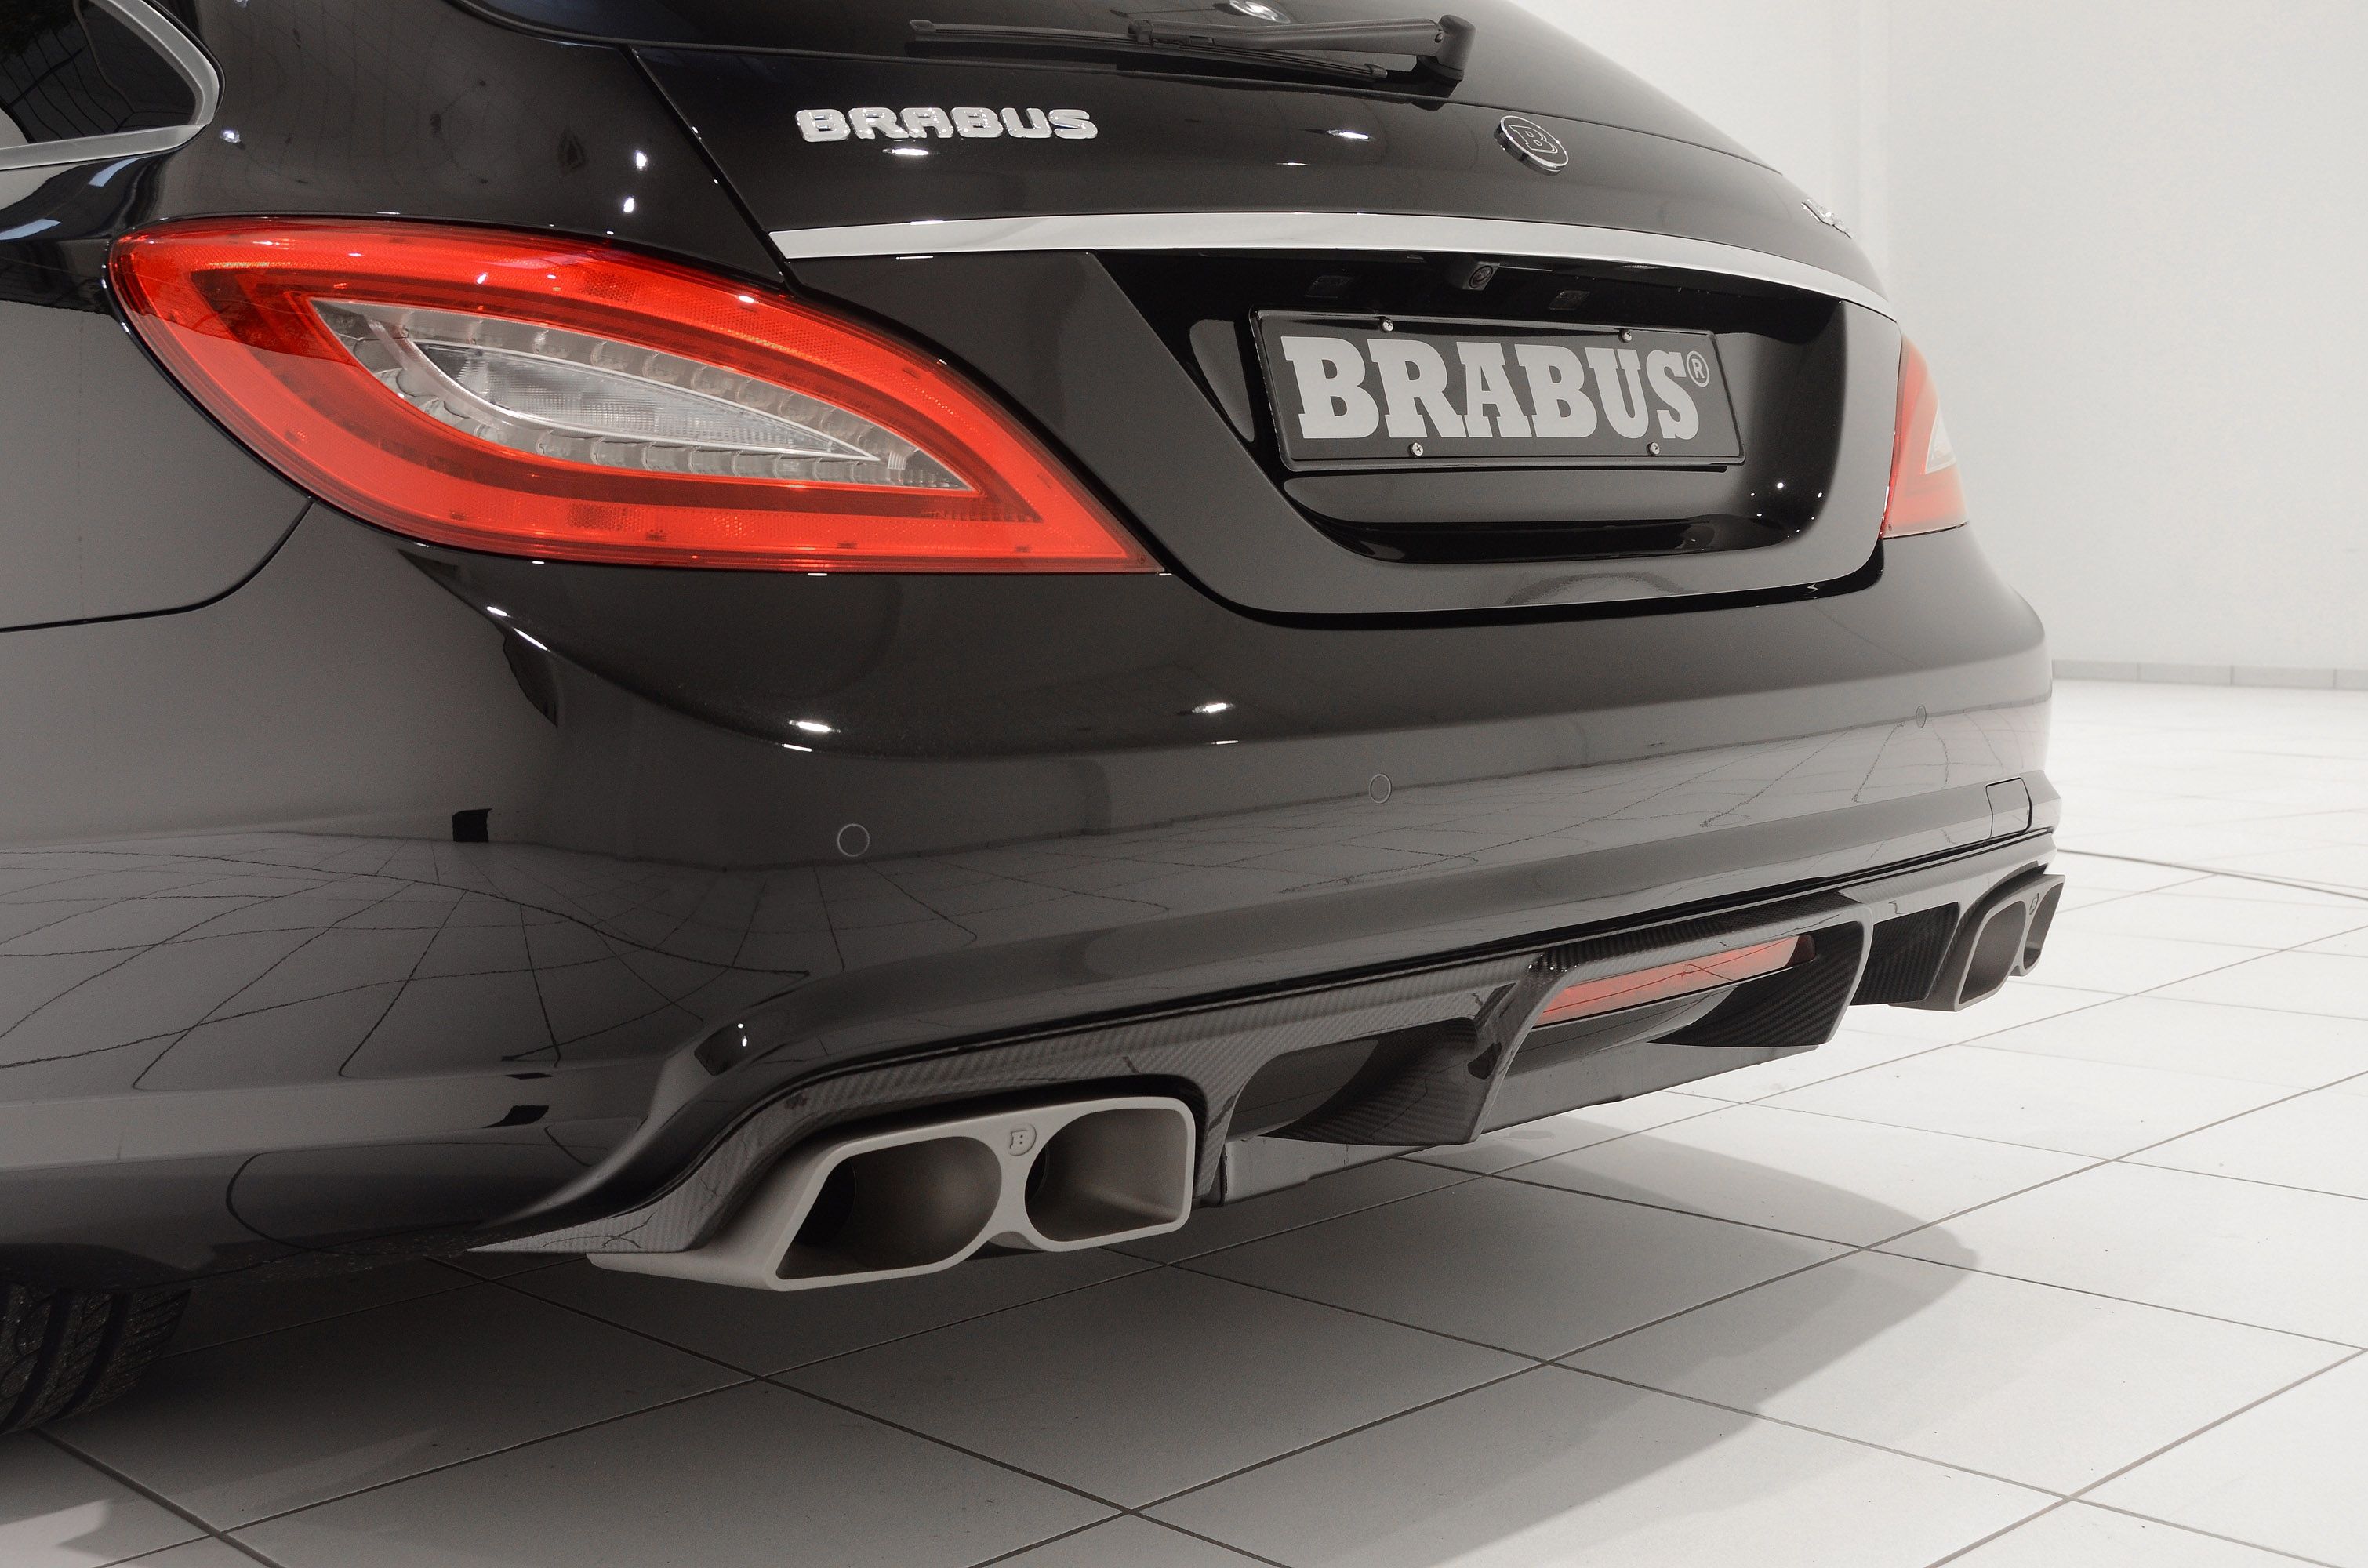 2013 Mercedes CLS63 AMG B63S-730 by Brabus